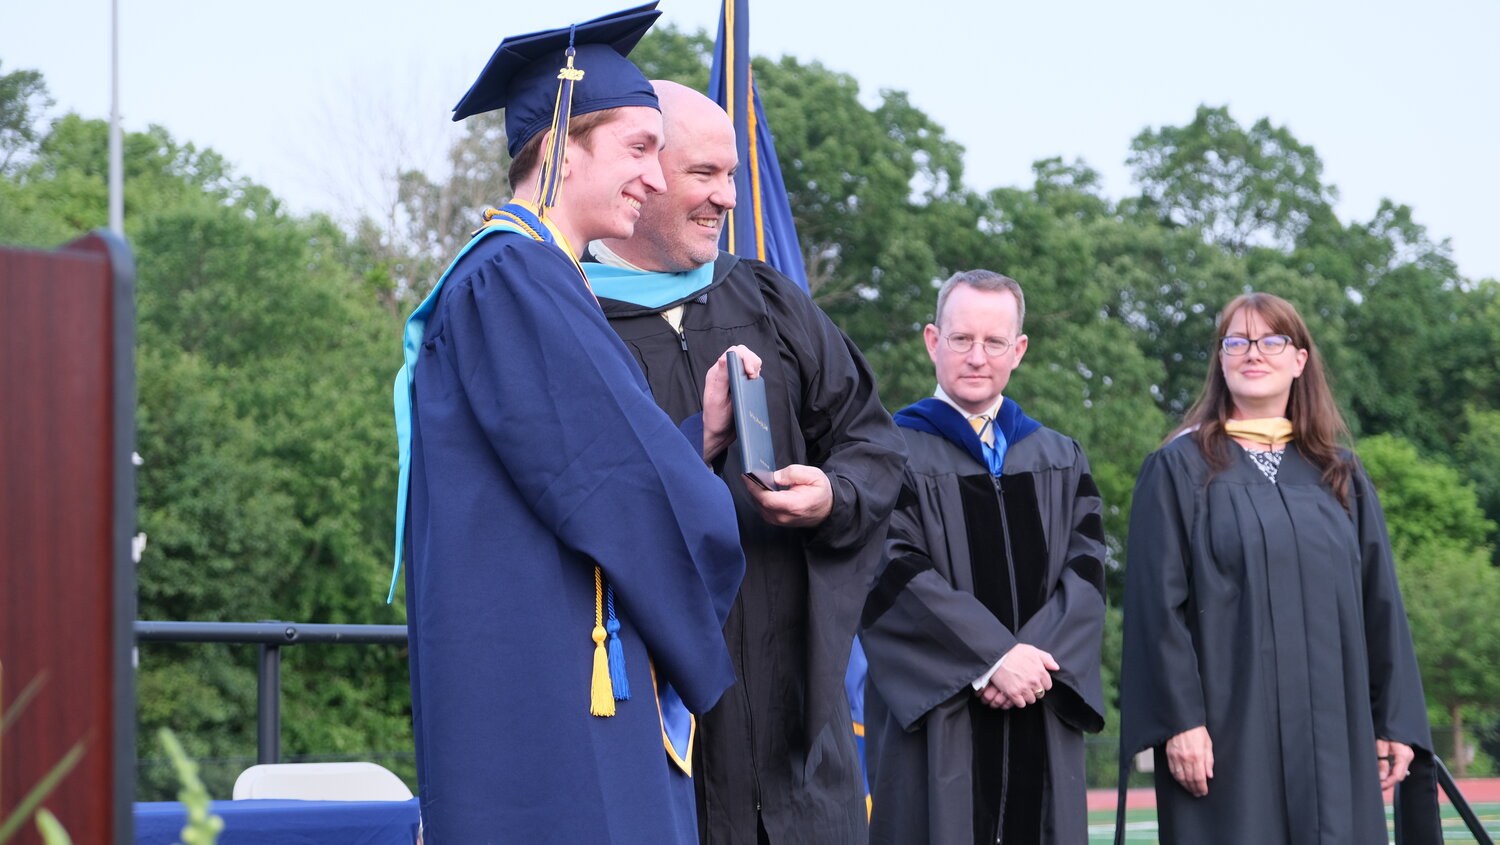 Senior Christopher O’Brien poses for a photograph with High School Principal Patrick Sasse as Superintendent Dr. Charles Lentz and school board president Judeth Finn look on.